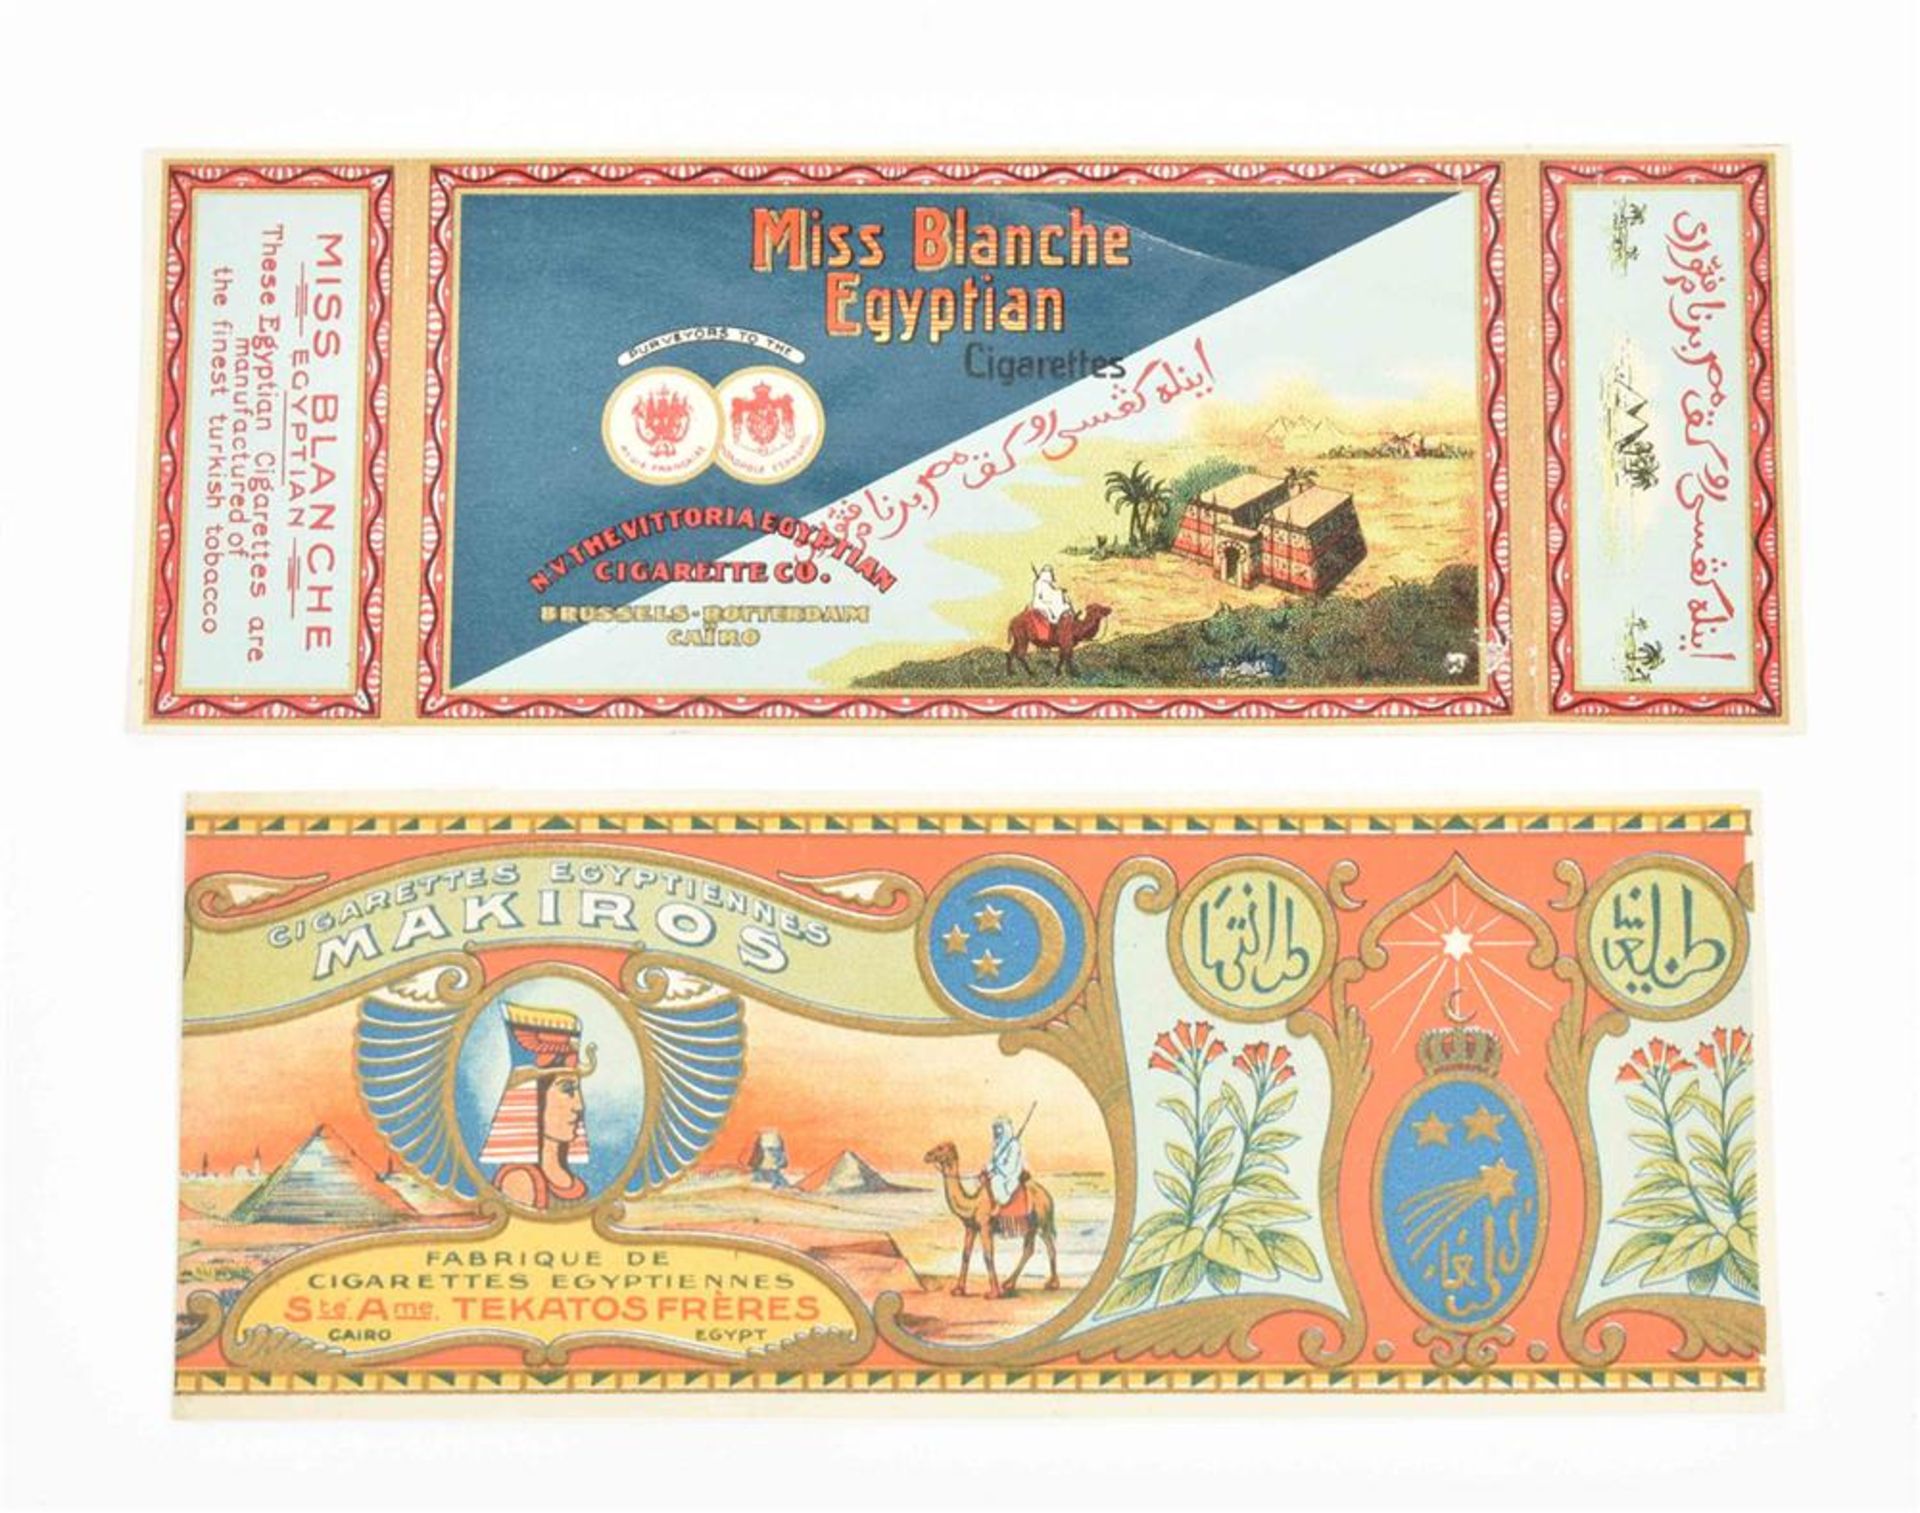 [Tobacco] 220 tobacco and cigarette labels on Egypt and the Middle East - Image 5 of 10